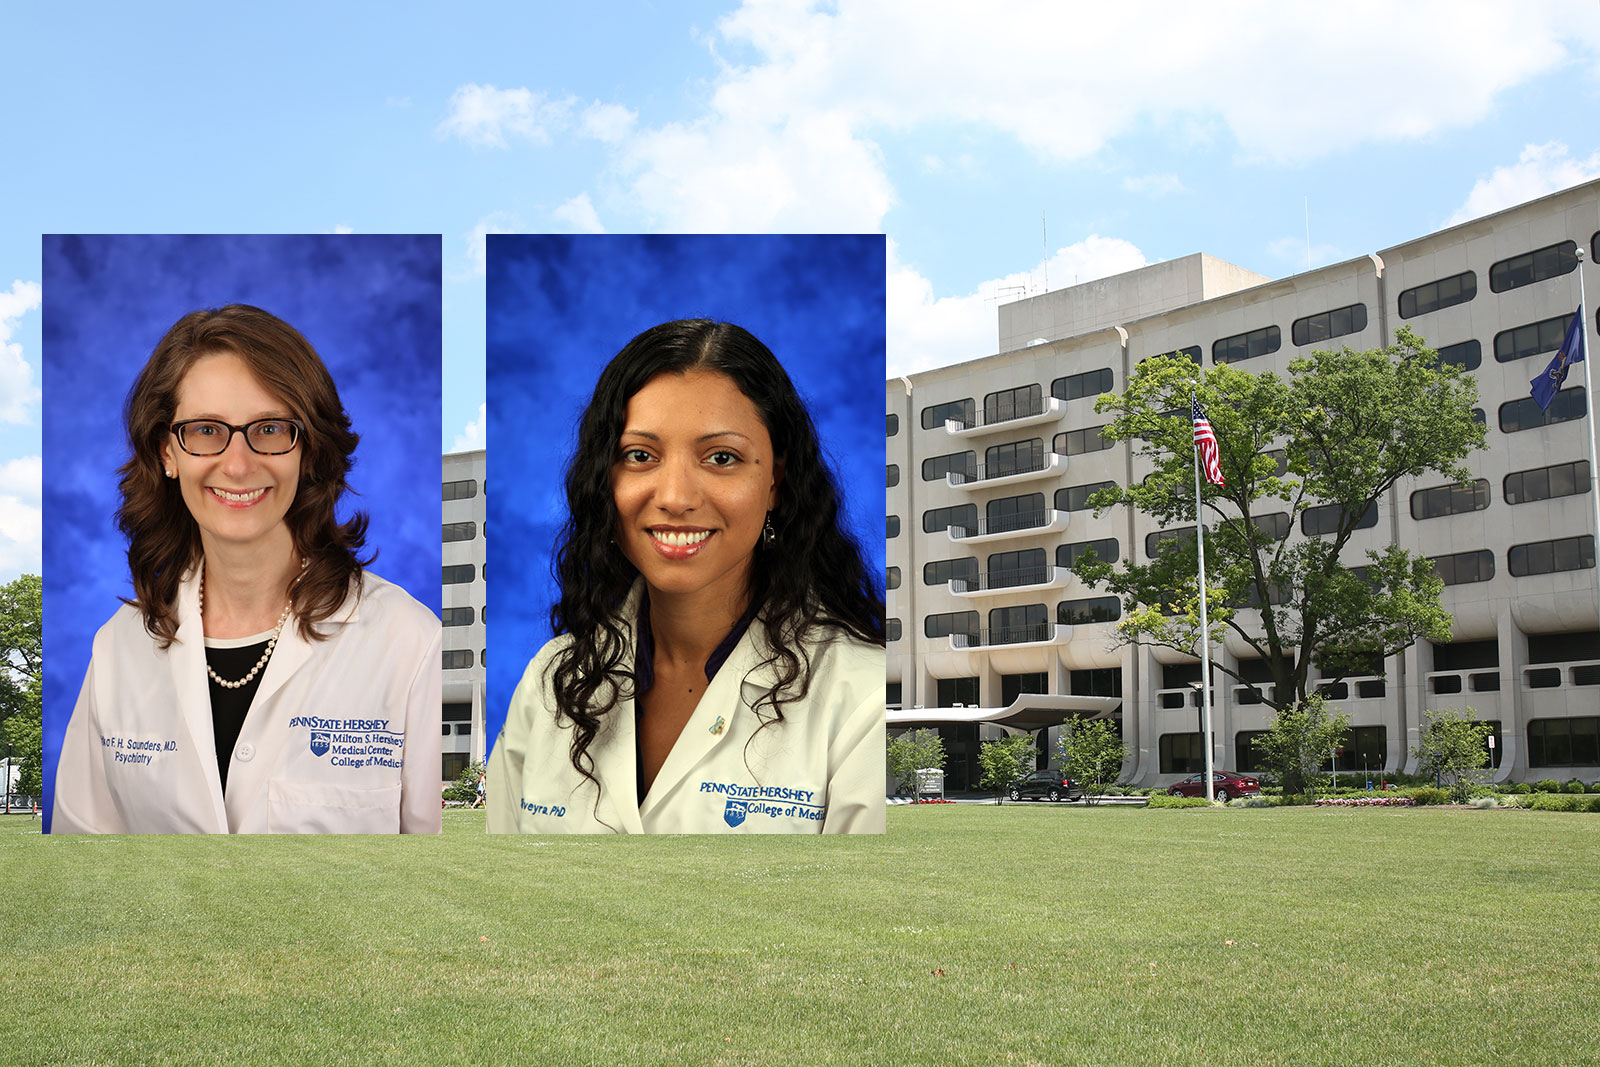 Drs. Erika Saunders, left, and Patricia Silveyra, right, were recently chosen for leadership programs. Professional head-and-shoulders photos of the two women are seen superimposed on an image of Penn State College of Medicine's Crescent building in Hershey, PA.